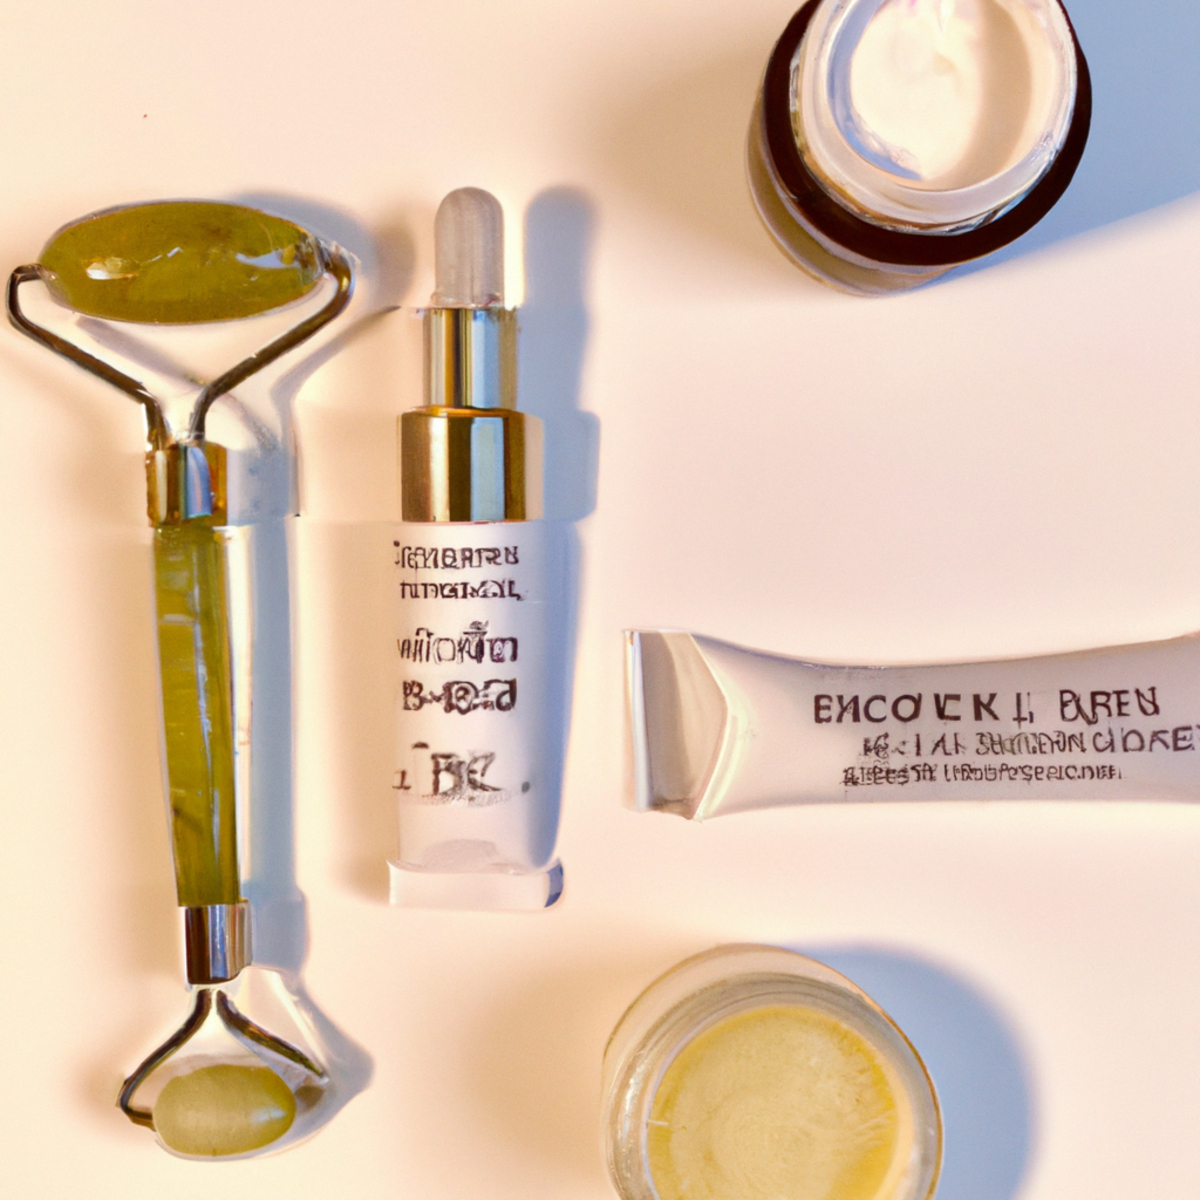 Get ready to roll with your natural skin care routines! This collection of anti-aging essentials will have you feeling fresh-faced and fabulous in no time. From moisturizer to serum, eye cream to facial roller, these products are the perfect addition to your minimalist routine. So why wait? Start pampering your skin today!